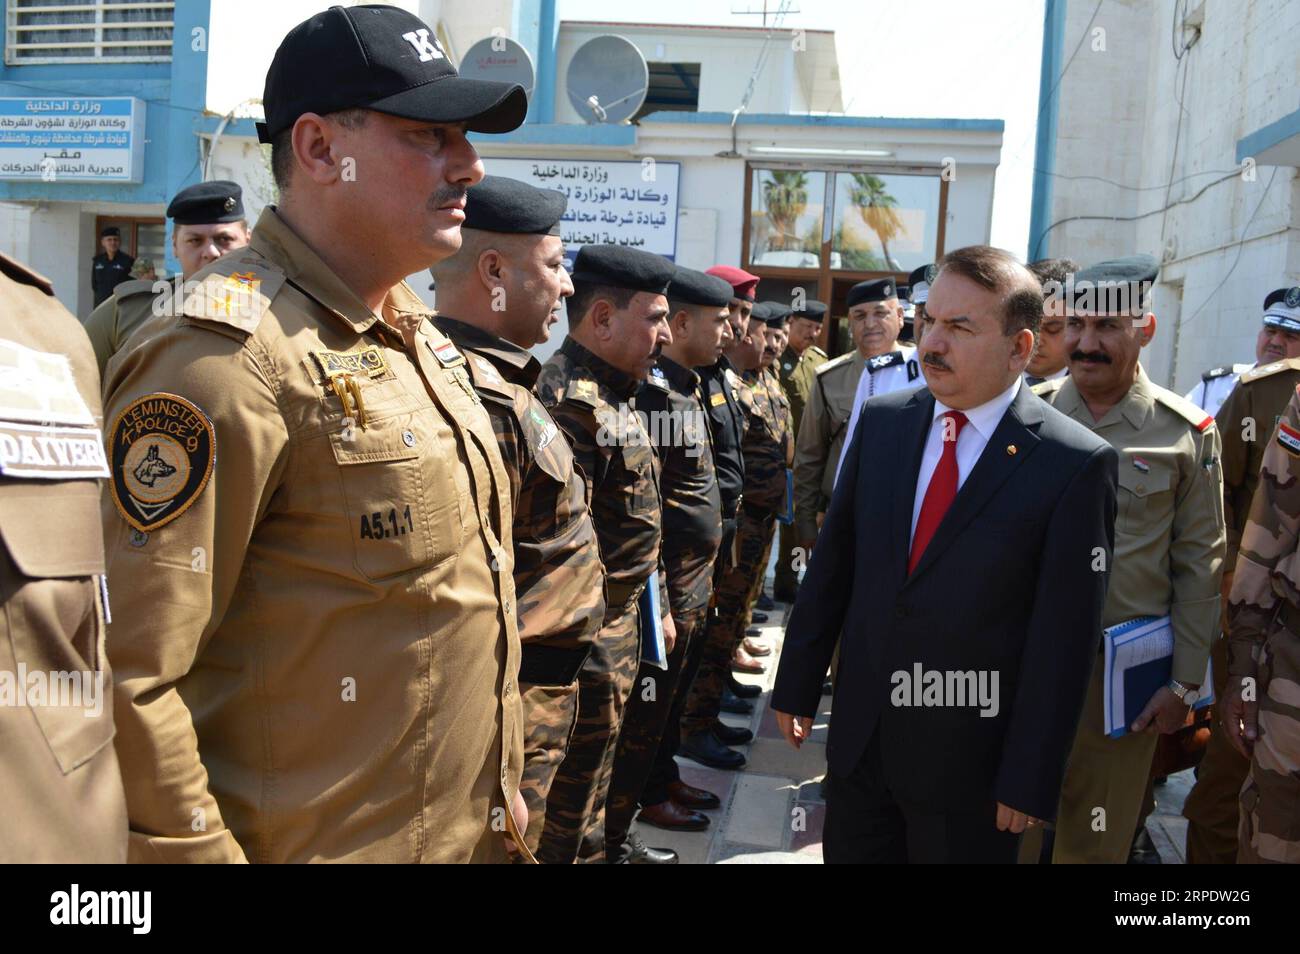 (190812) -- , Aug. 12, 2019 -- Iraqi Interior Minister Yassin al-Yasiri inspects police officers in Mosul, Iraq on Aug. 11, 2019. The Iraqi Interior Ministry reinstated more than 13,000 police personnel after being fired following the extremist Islamic State (IS) militants took control of Iraq s northern city of Mosul in 2014. IRAQ--POLICE PERSONNEL REINSTATING Baghdad PUBLICATIONxNOTxINxCHN Stock Photo